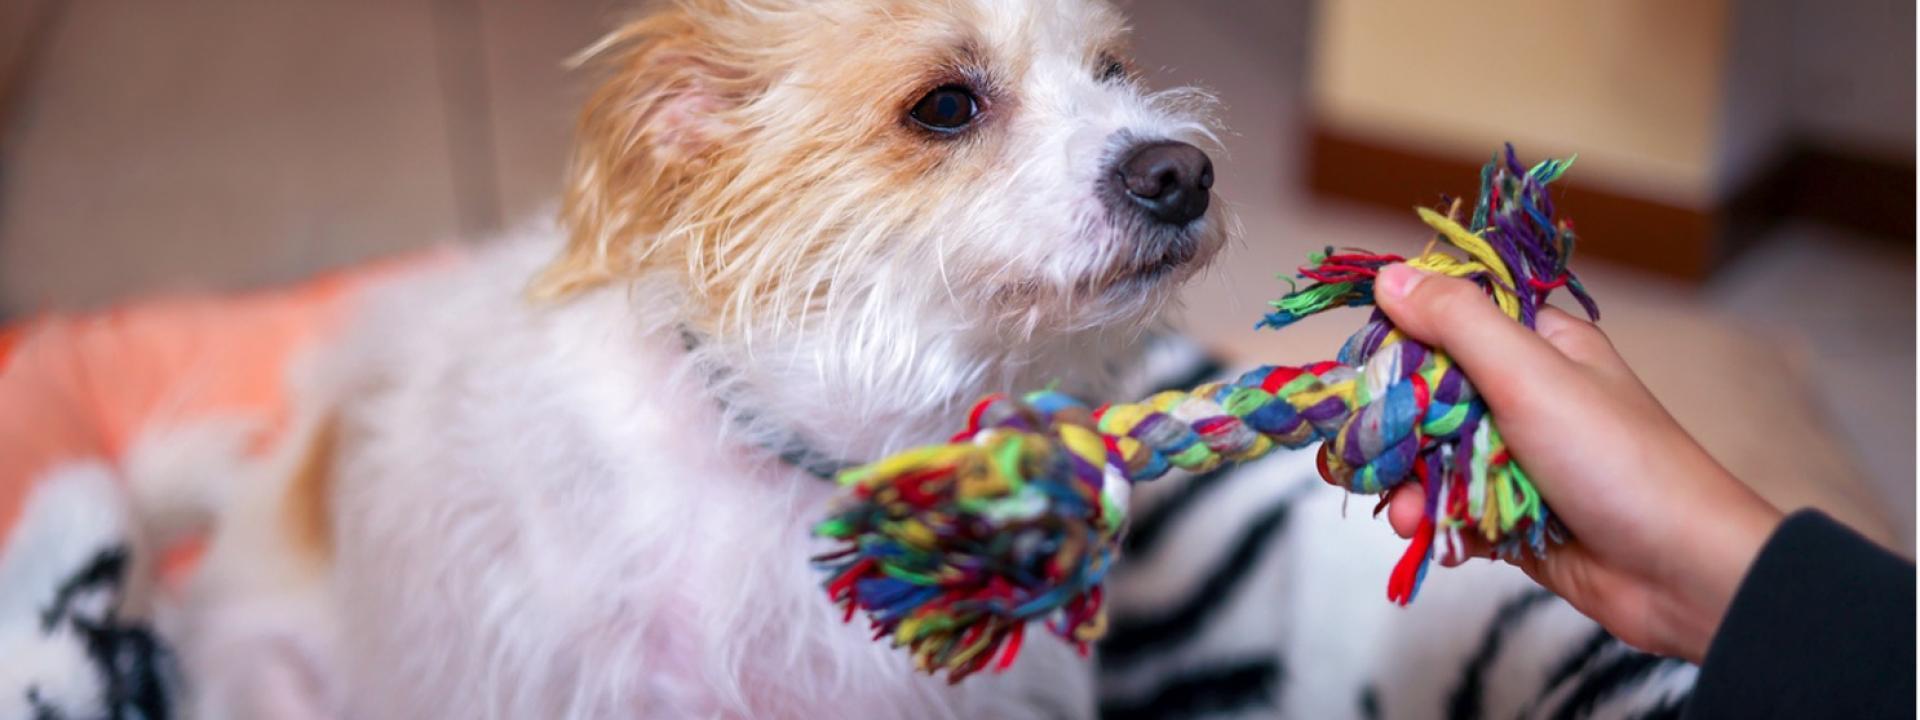 A dog playing with a toy, DIY Christmas Gifts for Pets